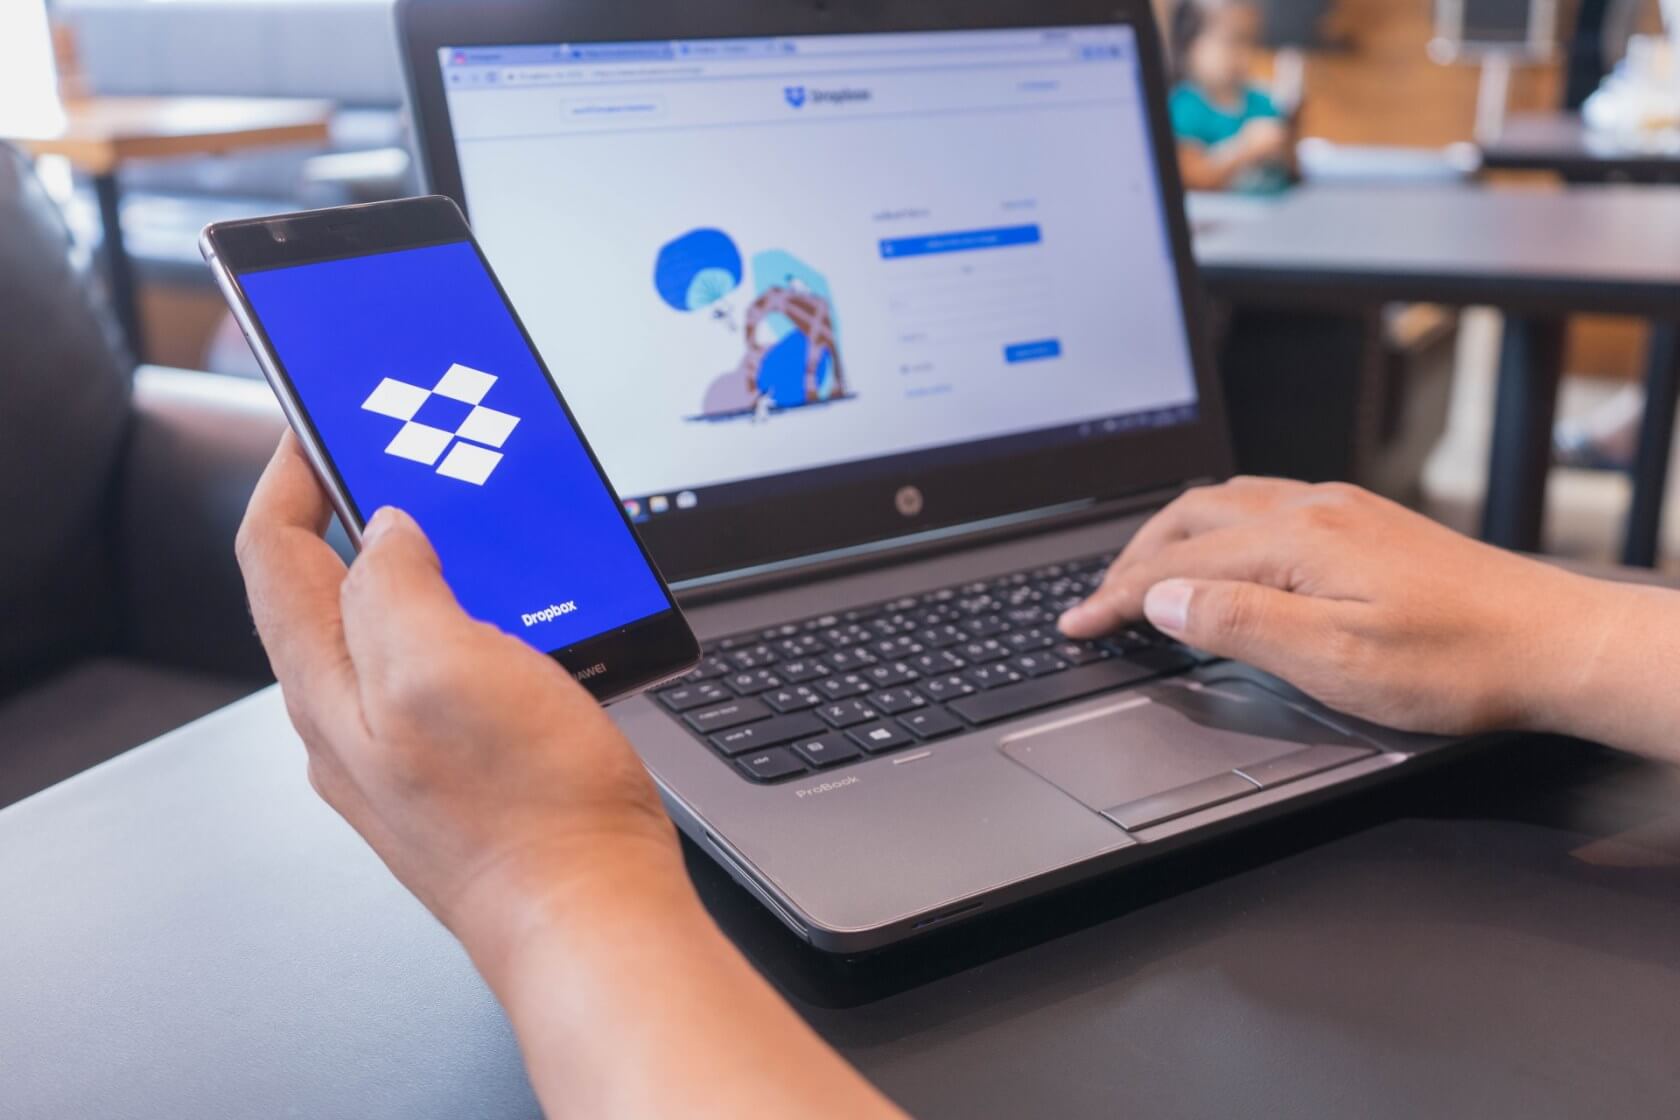 Dropbox kills off unlimited storage offer in response to crypto-related abuses